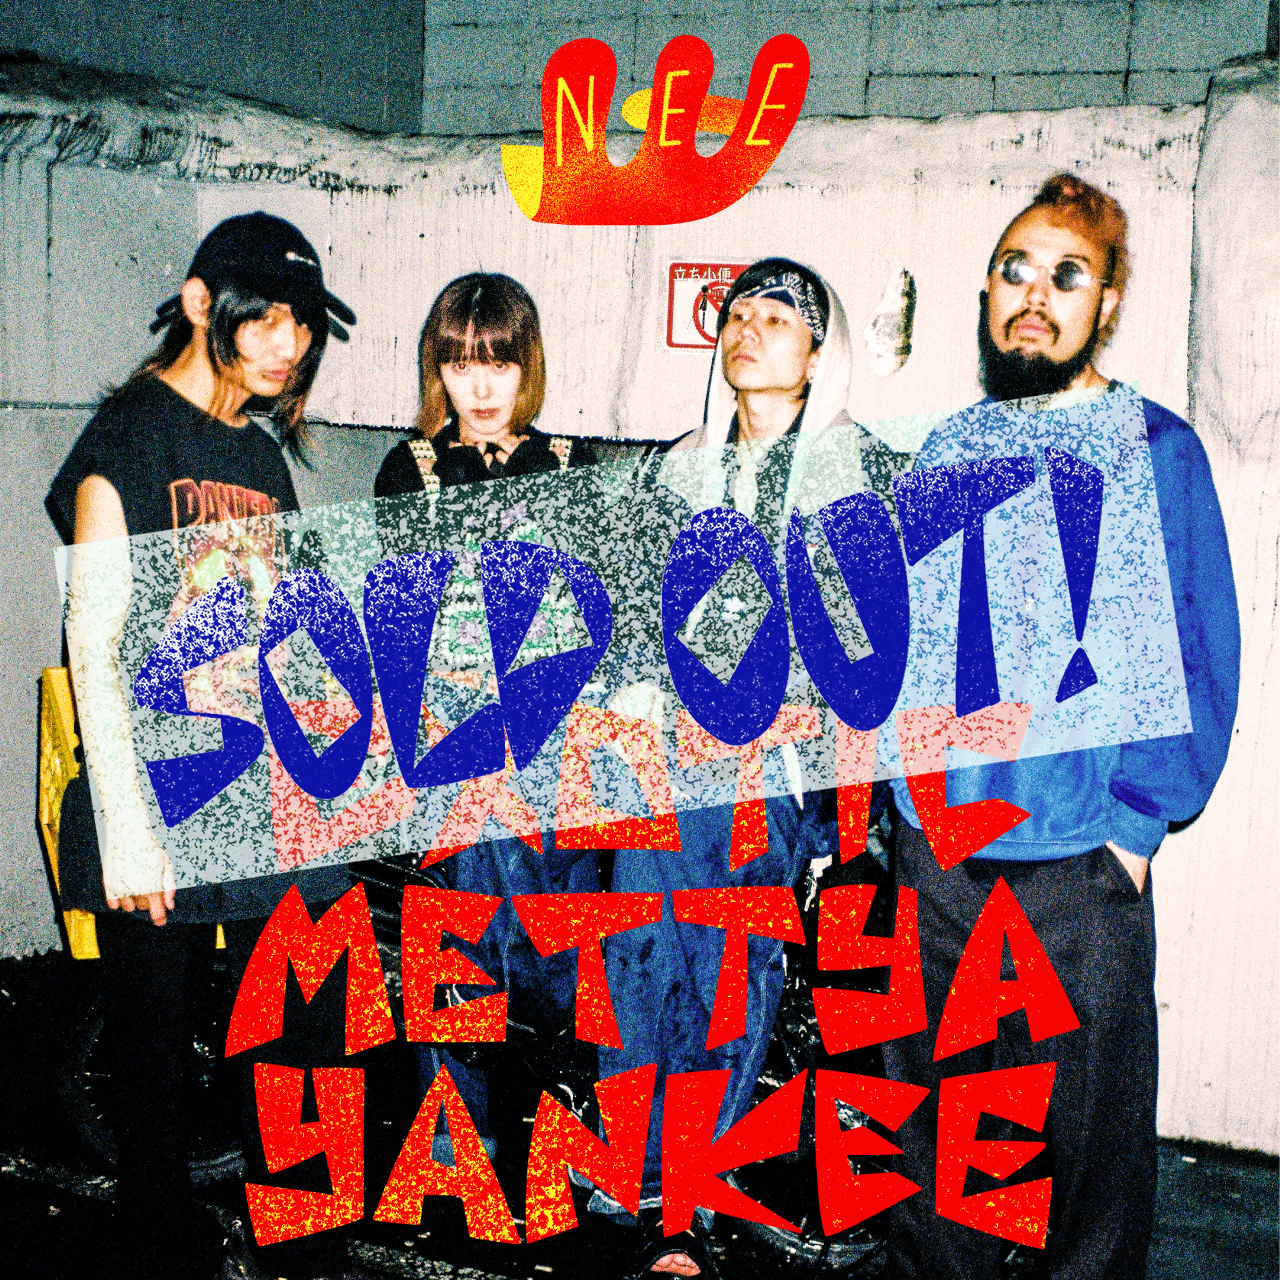 NEE 6th TOUR「EXOTIC METTYA YANKEE」全公演SOLD OUT! | NEE